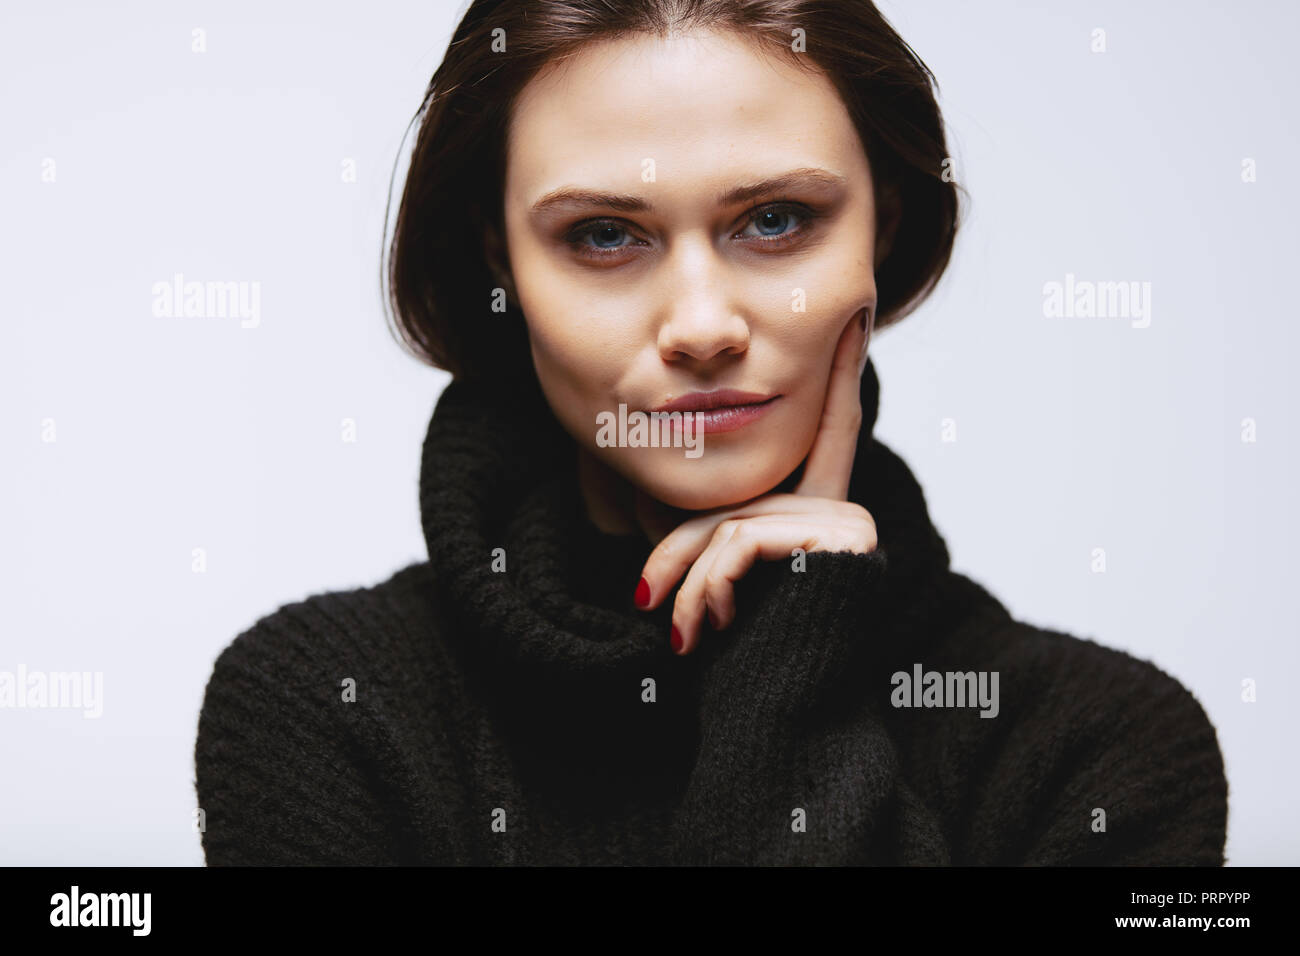 Close up portrait of beautiful woman wearing black sweater with her hand on chin. Caucasian female model staring at camera. Stock Photo